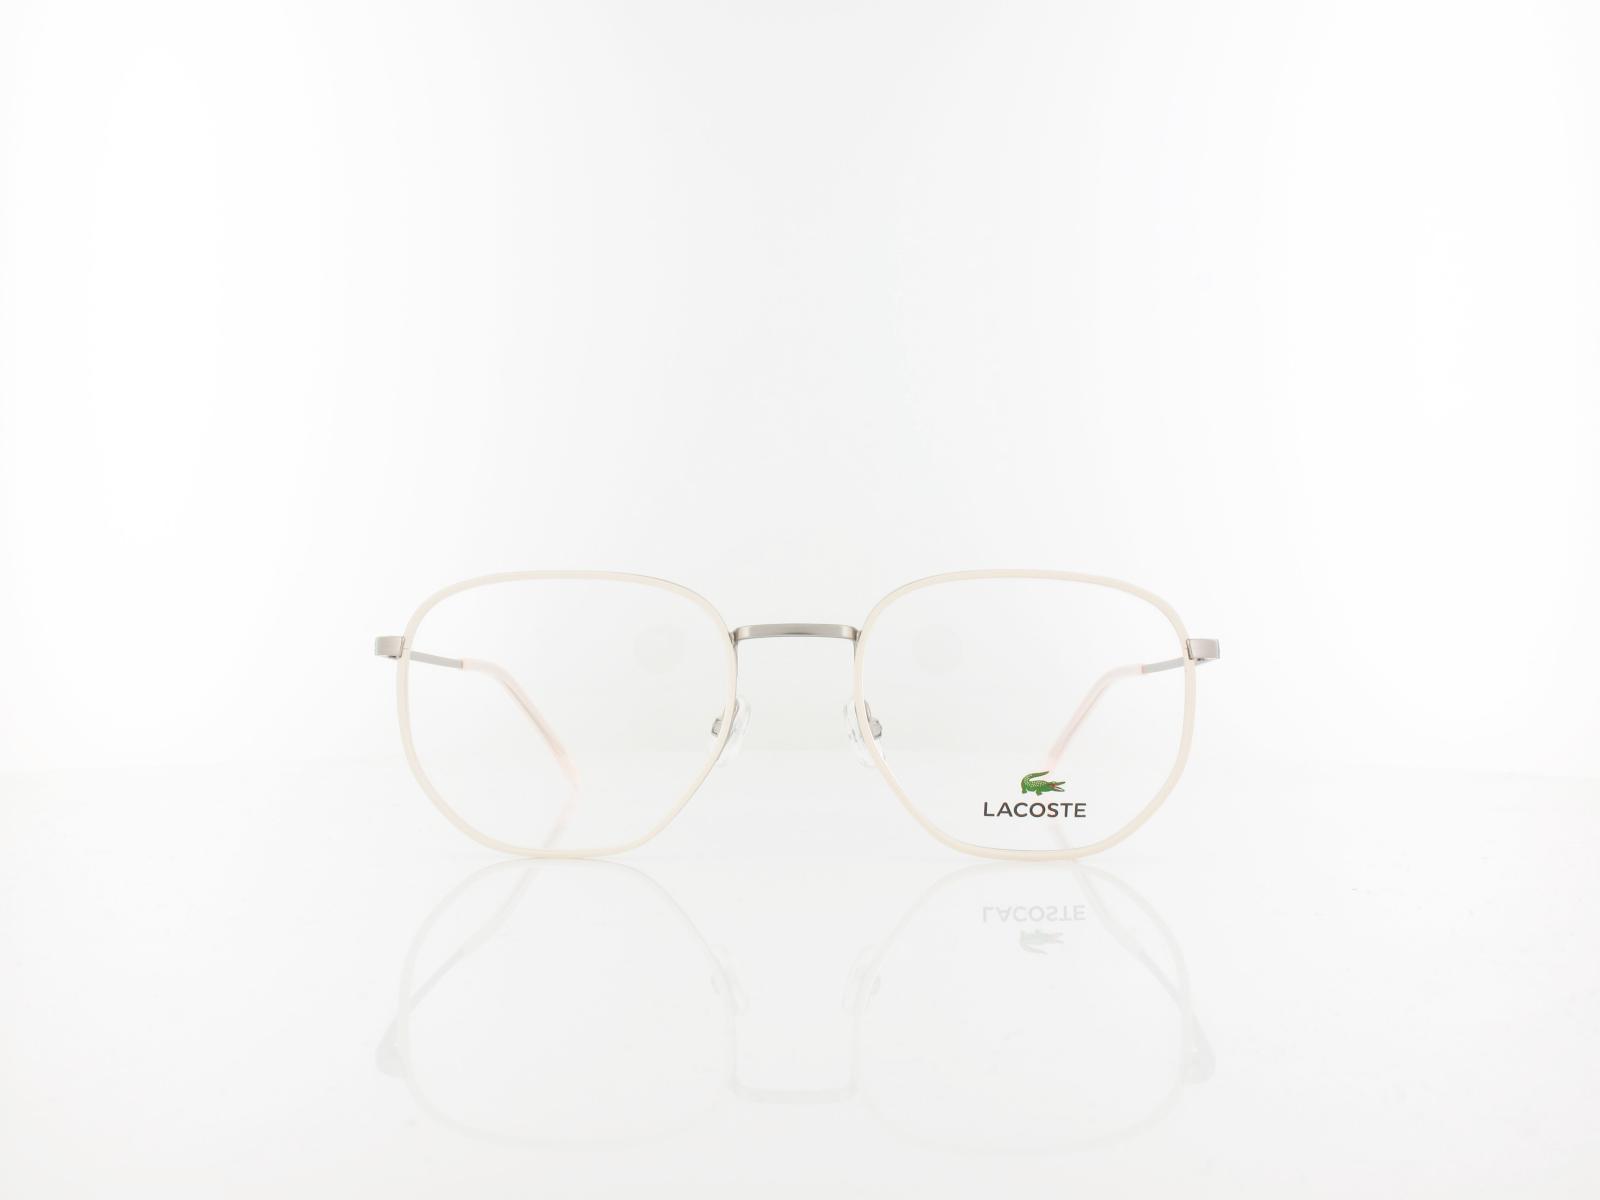 Lacoste | L2253 045 51 | silver nude pink